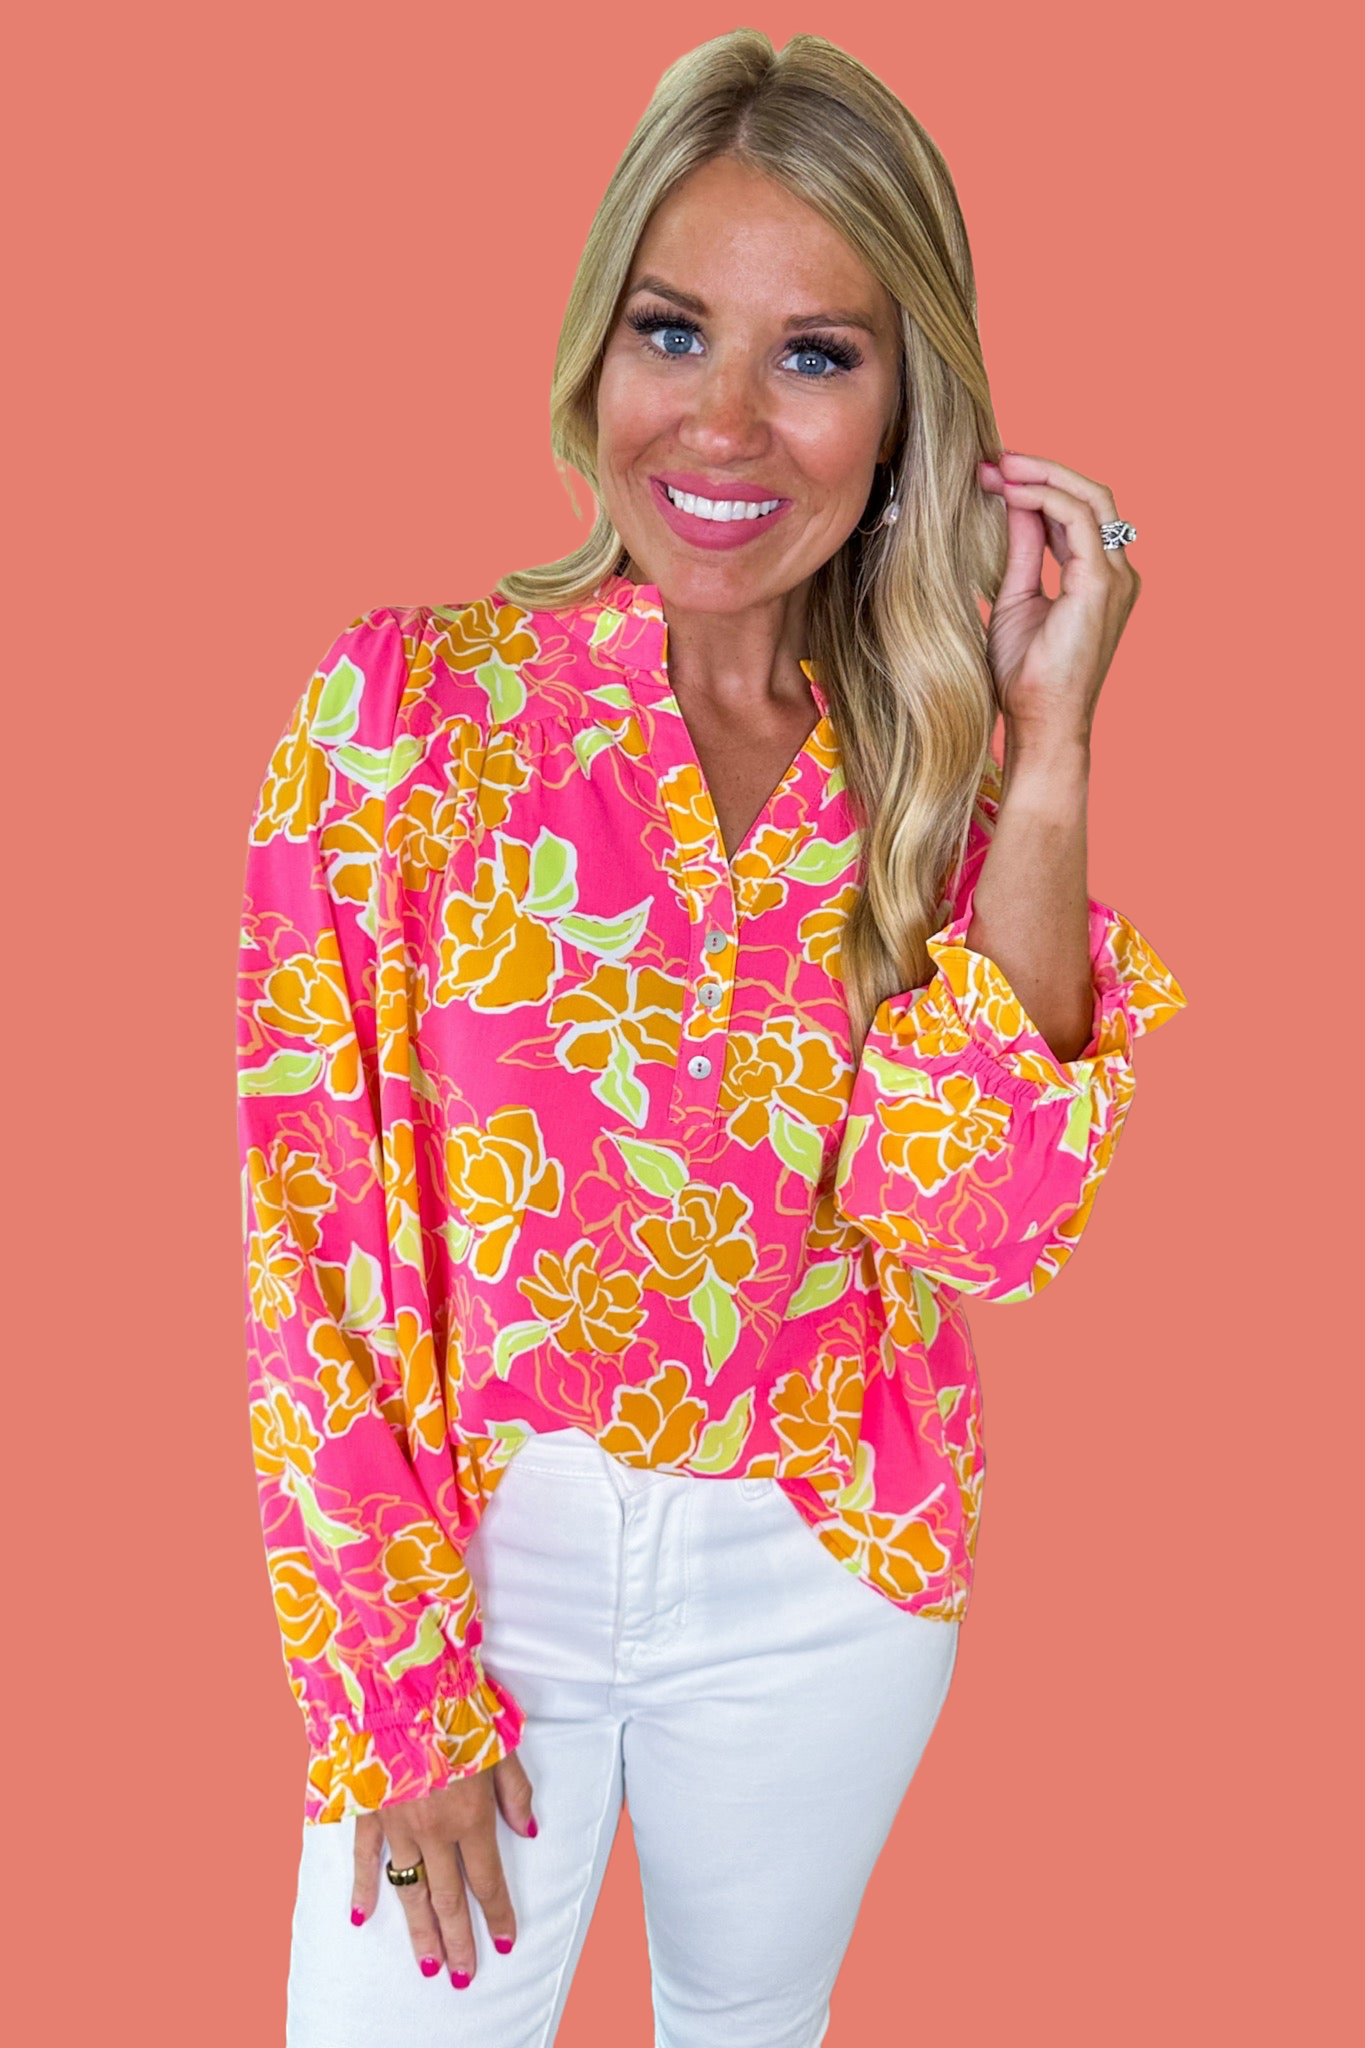 The Gianna Pinky Promise Pink Top by Michelle McDowell